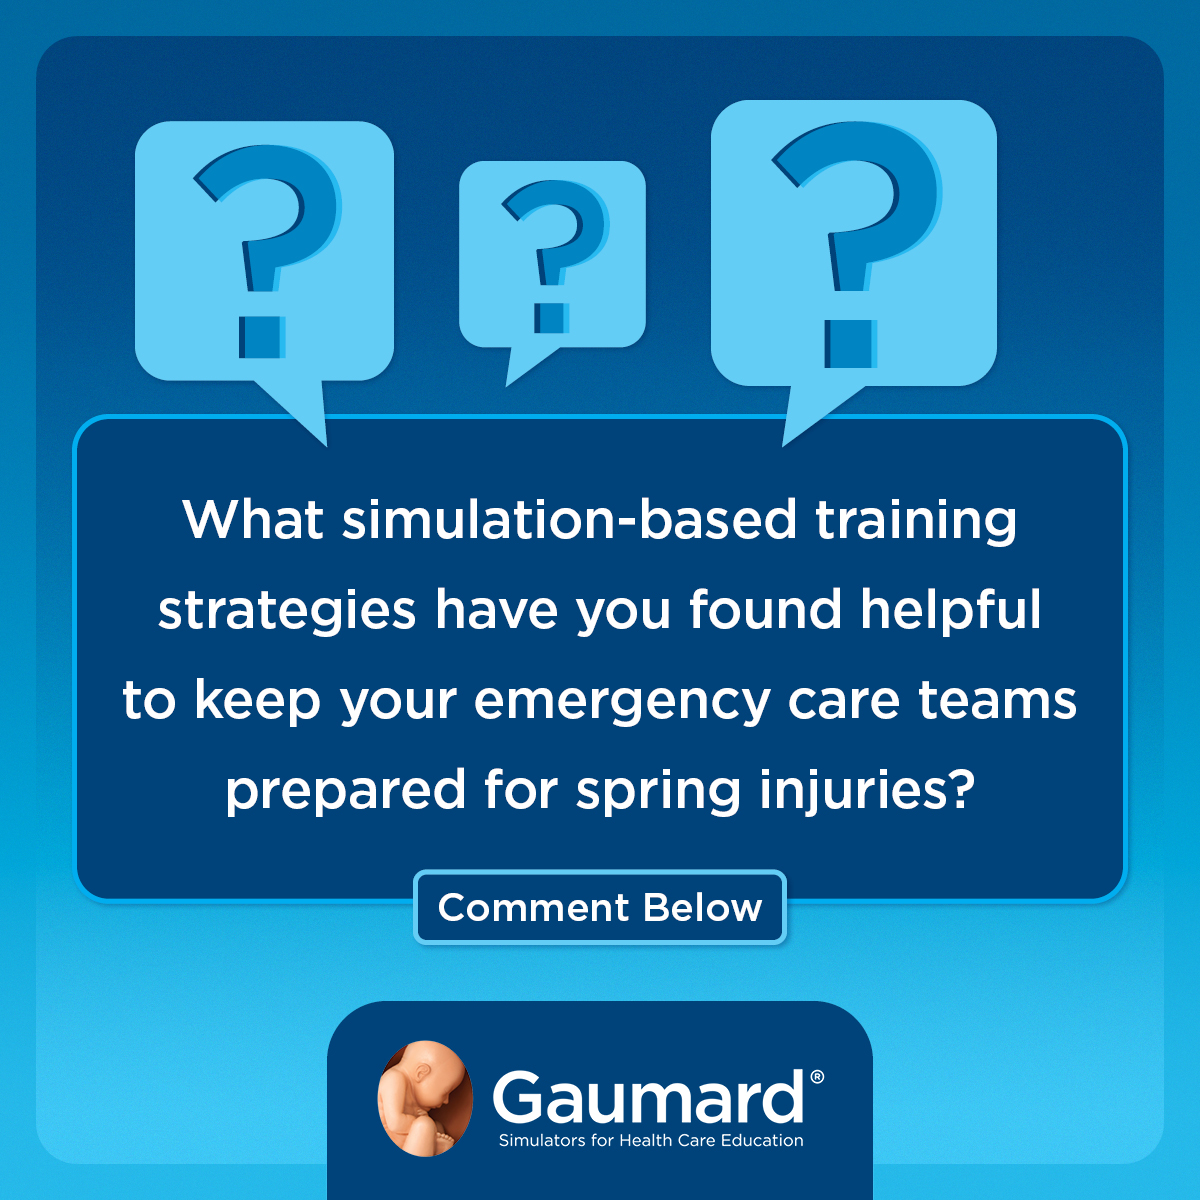 #DYK Injuries like abrasions, sprains, and fractures are more common in the spring. Gaumard pediatric simulators and wound kits facilitate realistic hands-on scenarios in wound assessment, care, and management so healthcare providers will be ready. gaumard.com/catalogsearch/…